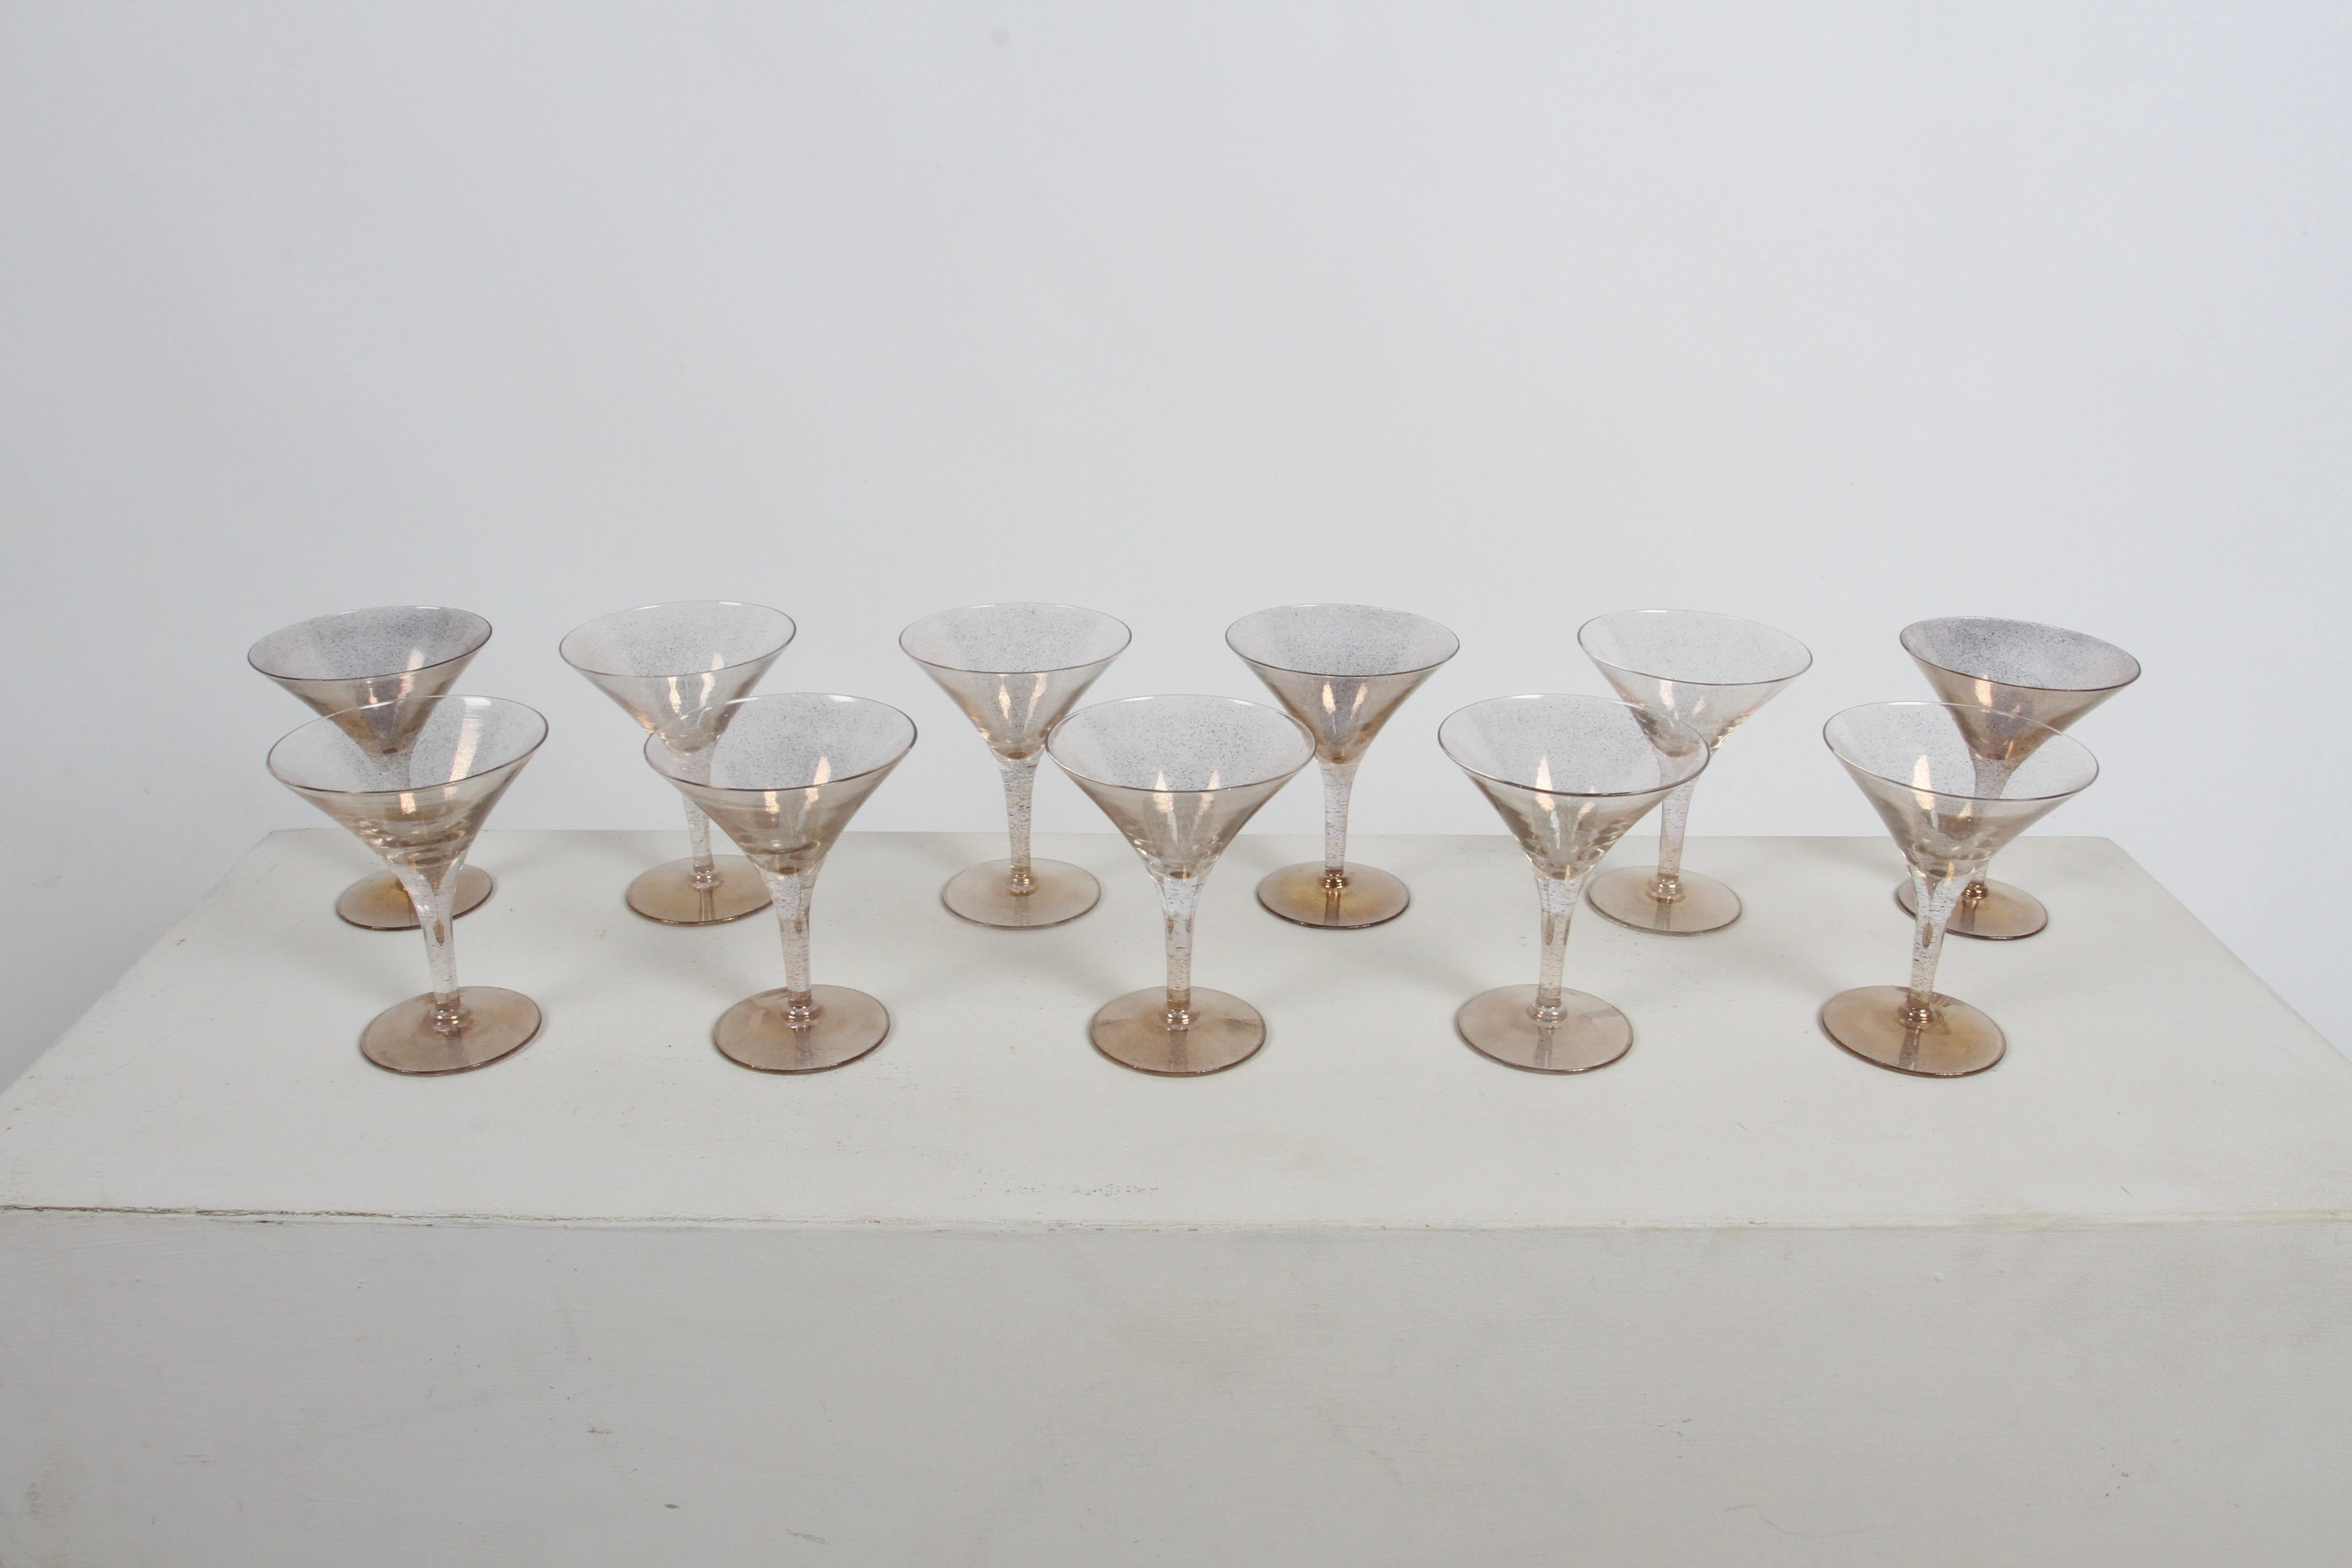 Glamourous Hollywood Regency 11 piece barware martini glassware set with gold fleck by Dorothy Thorpe.  The eleven martinis are in fine vintage condition, no chips. These are the perfect size to serve desert, ice cream or sorbet. Some have more gold